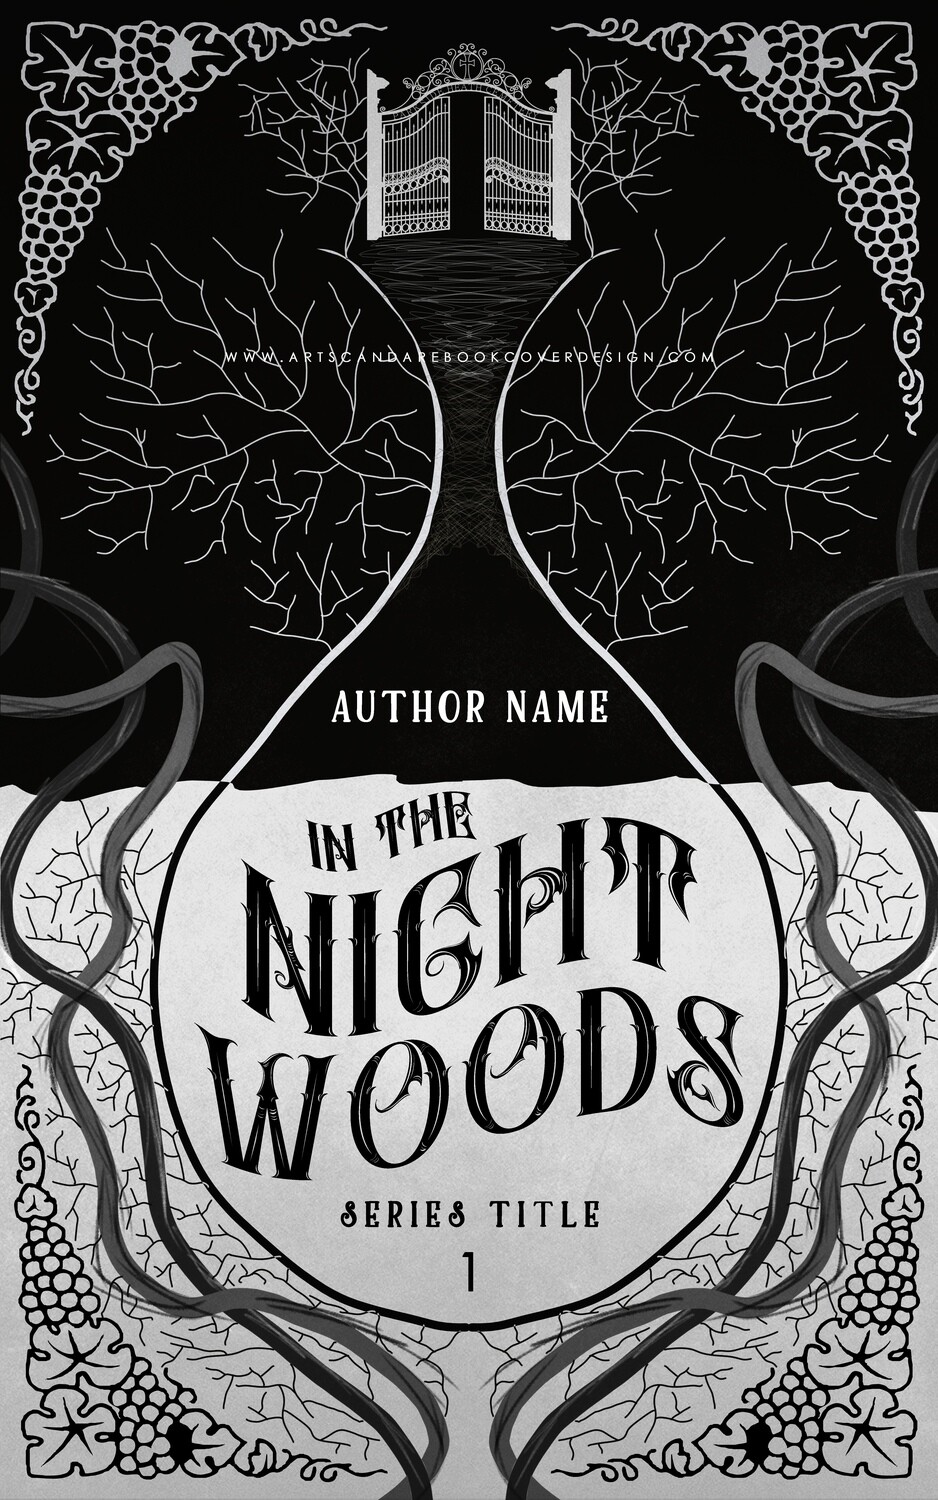 Ebook: In The Night Woods